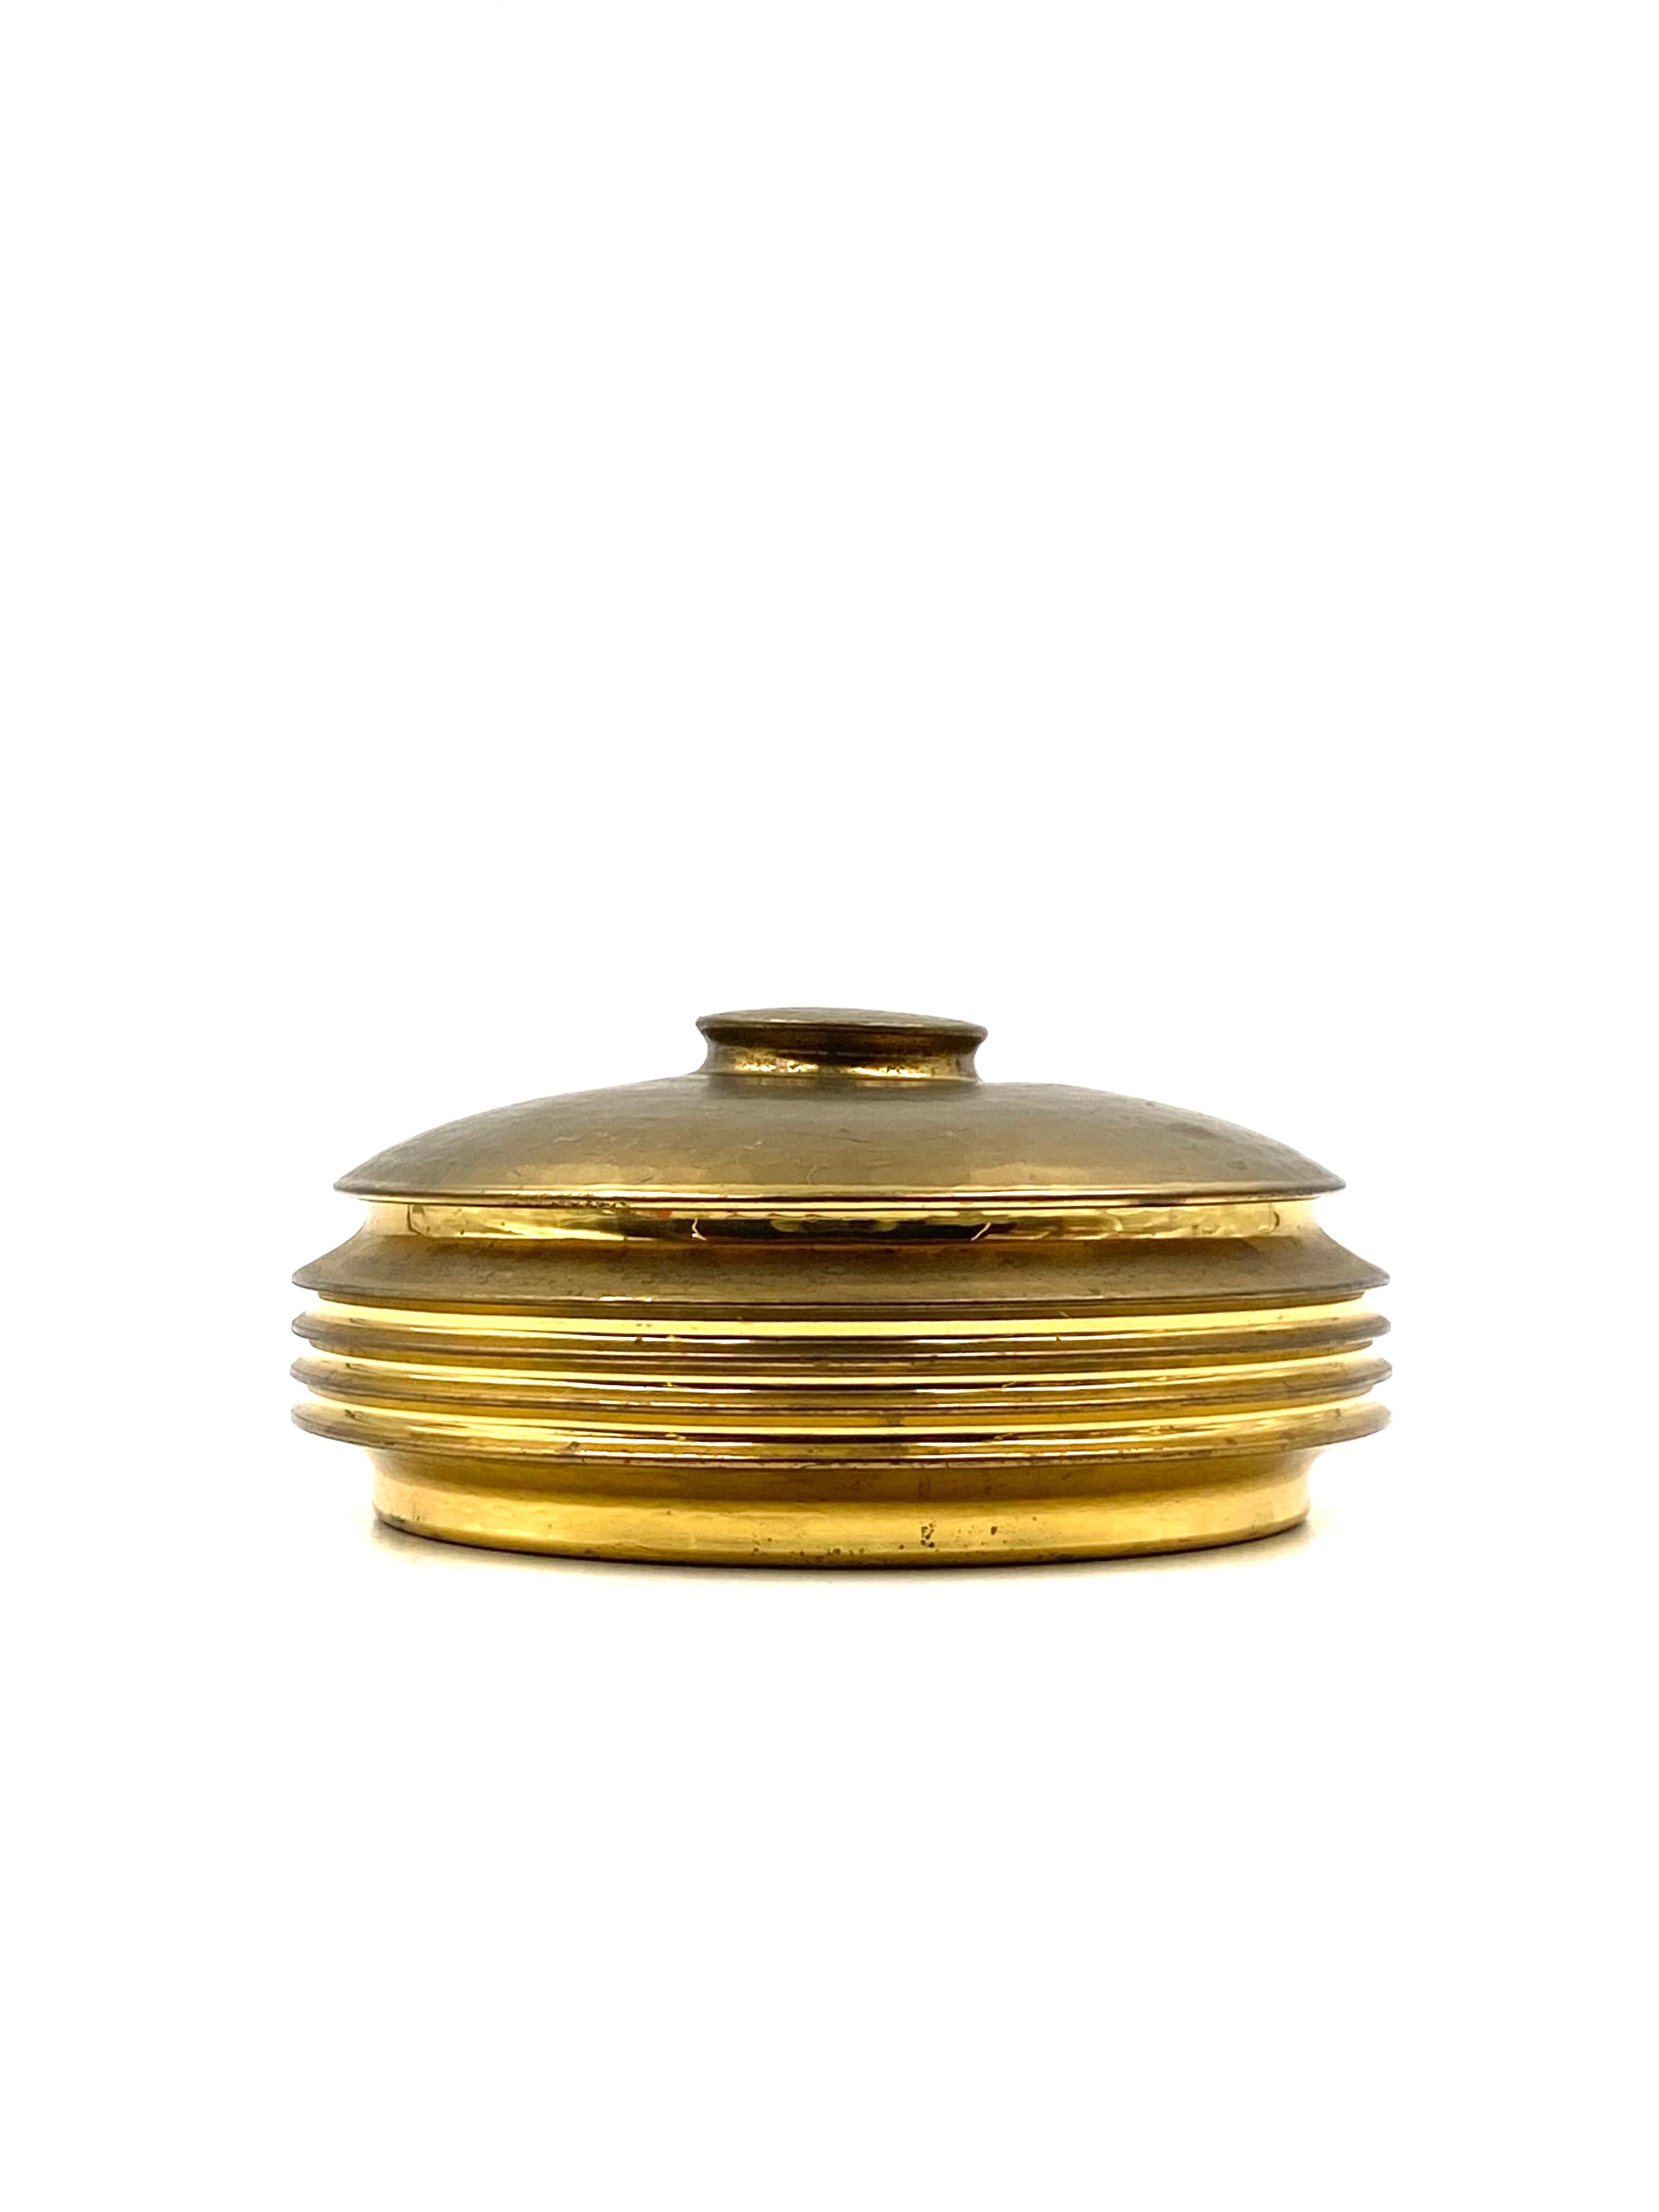 Mid-century  hand-hammered brass box, Zanetto Padova Italy 1970s For Sale 4